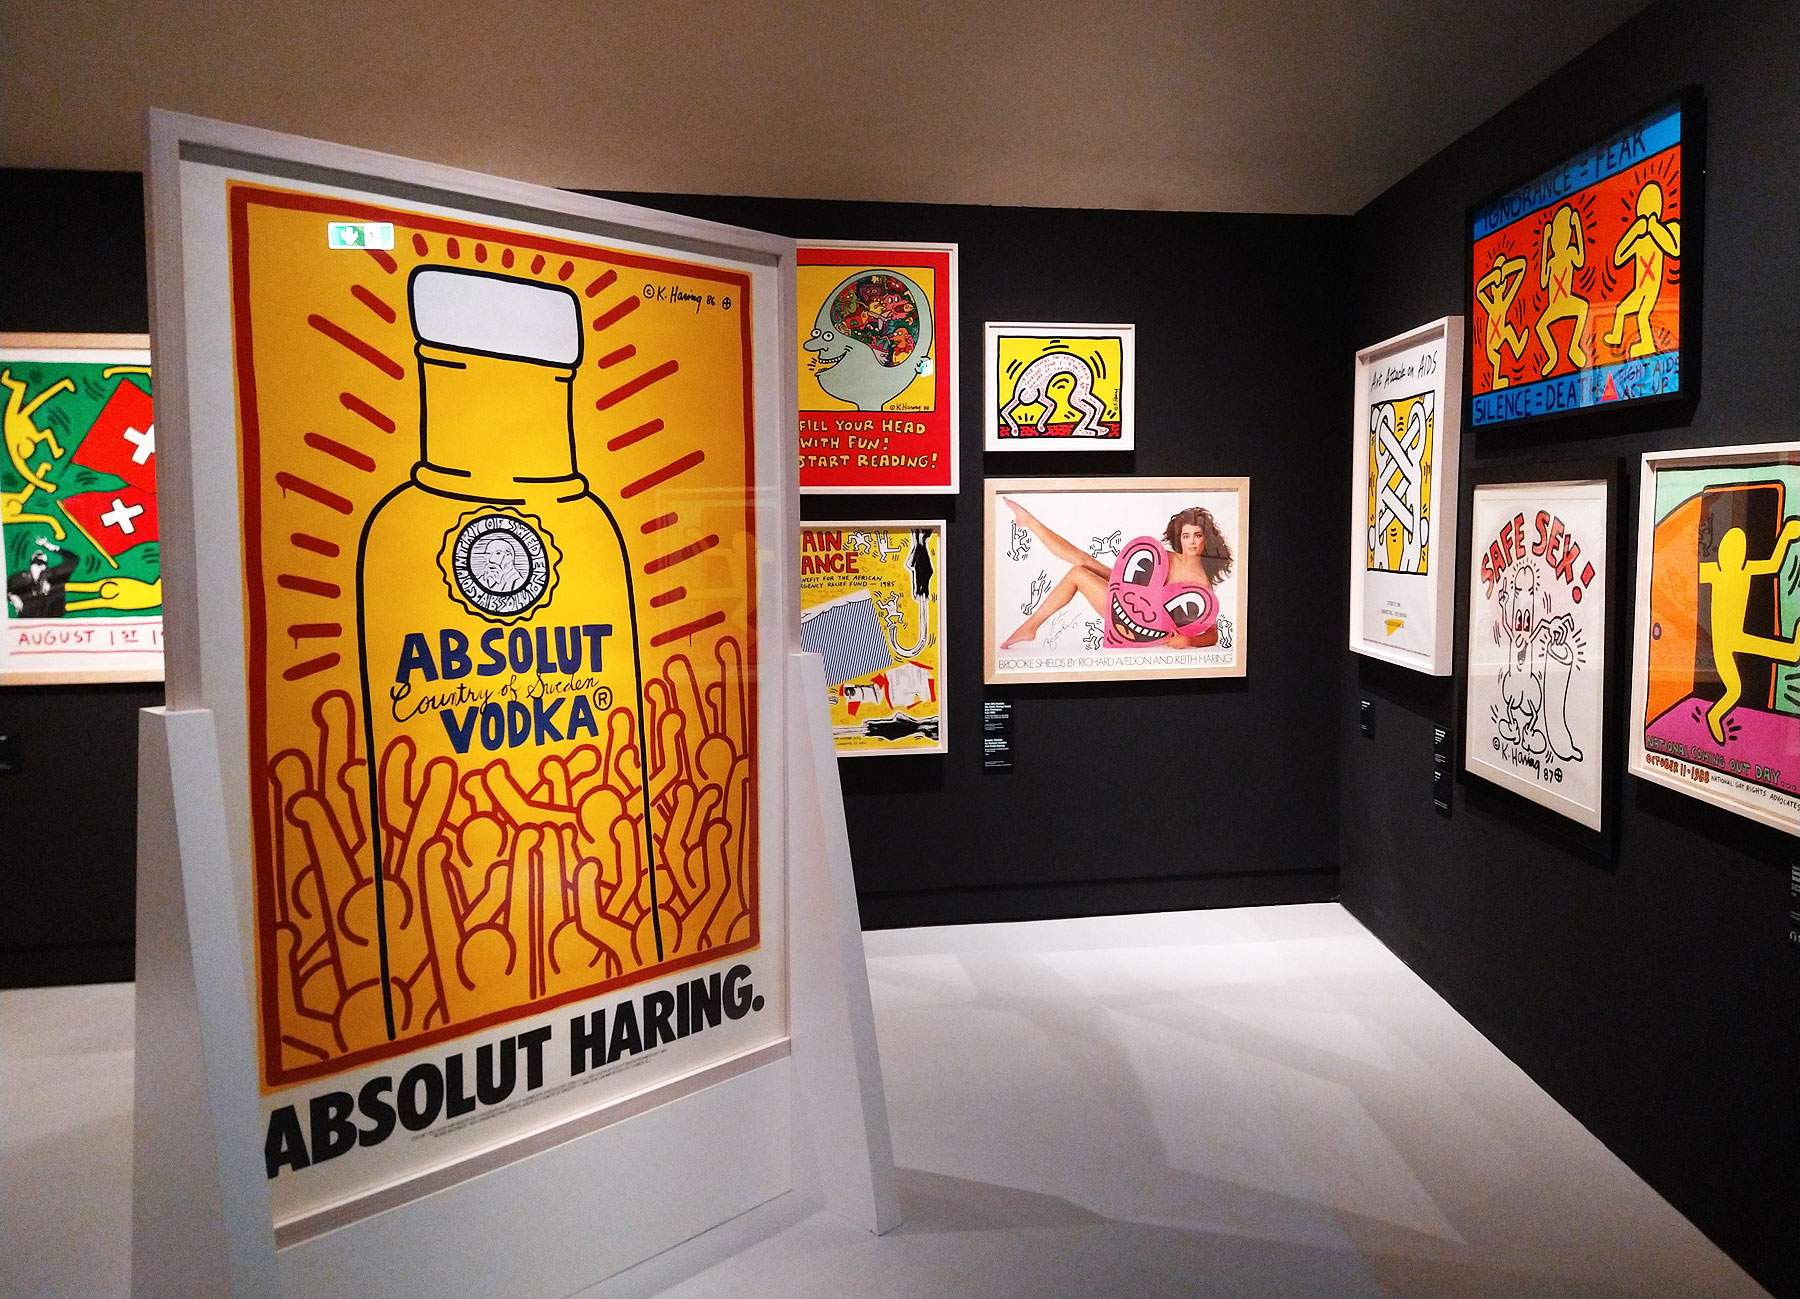 Major Keith Haring exhibition in Pisa, featuring 170 works from the Nakamura Collection. Photos 